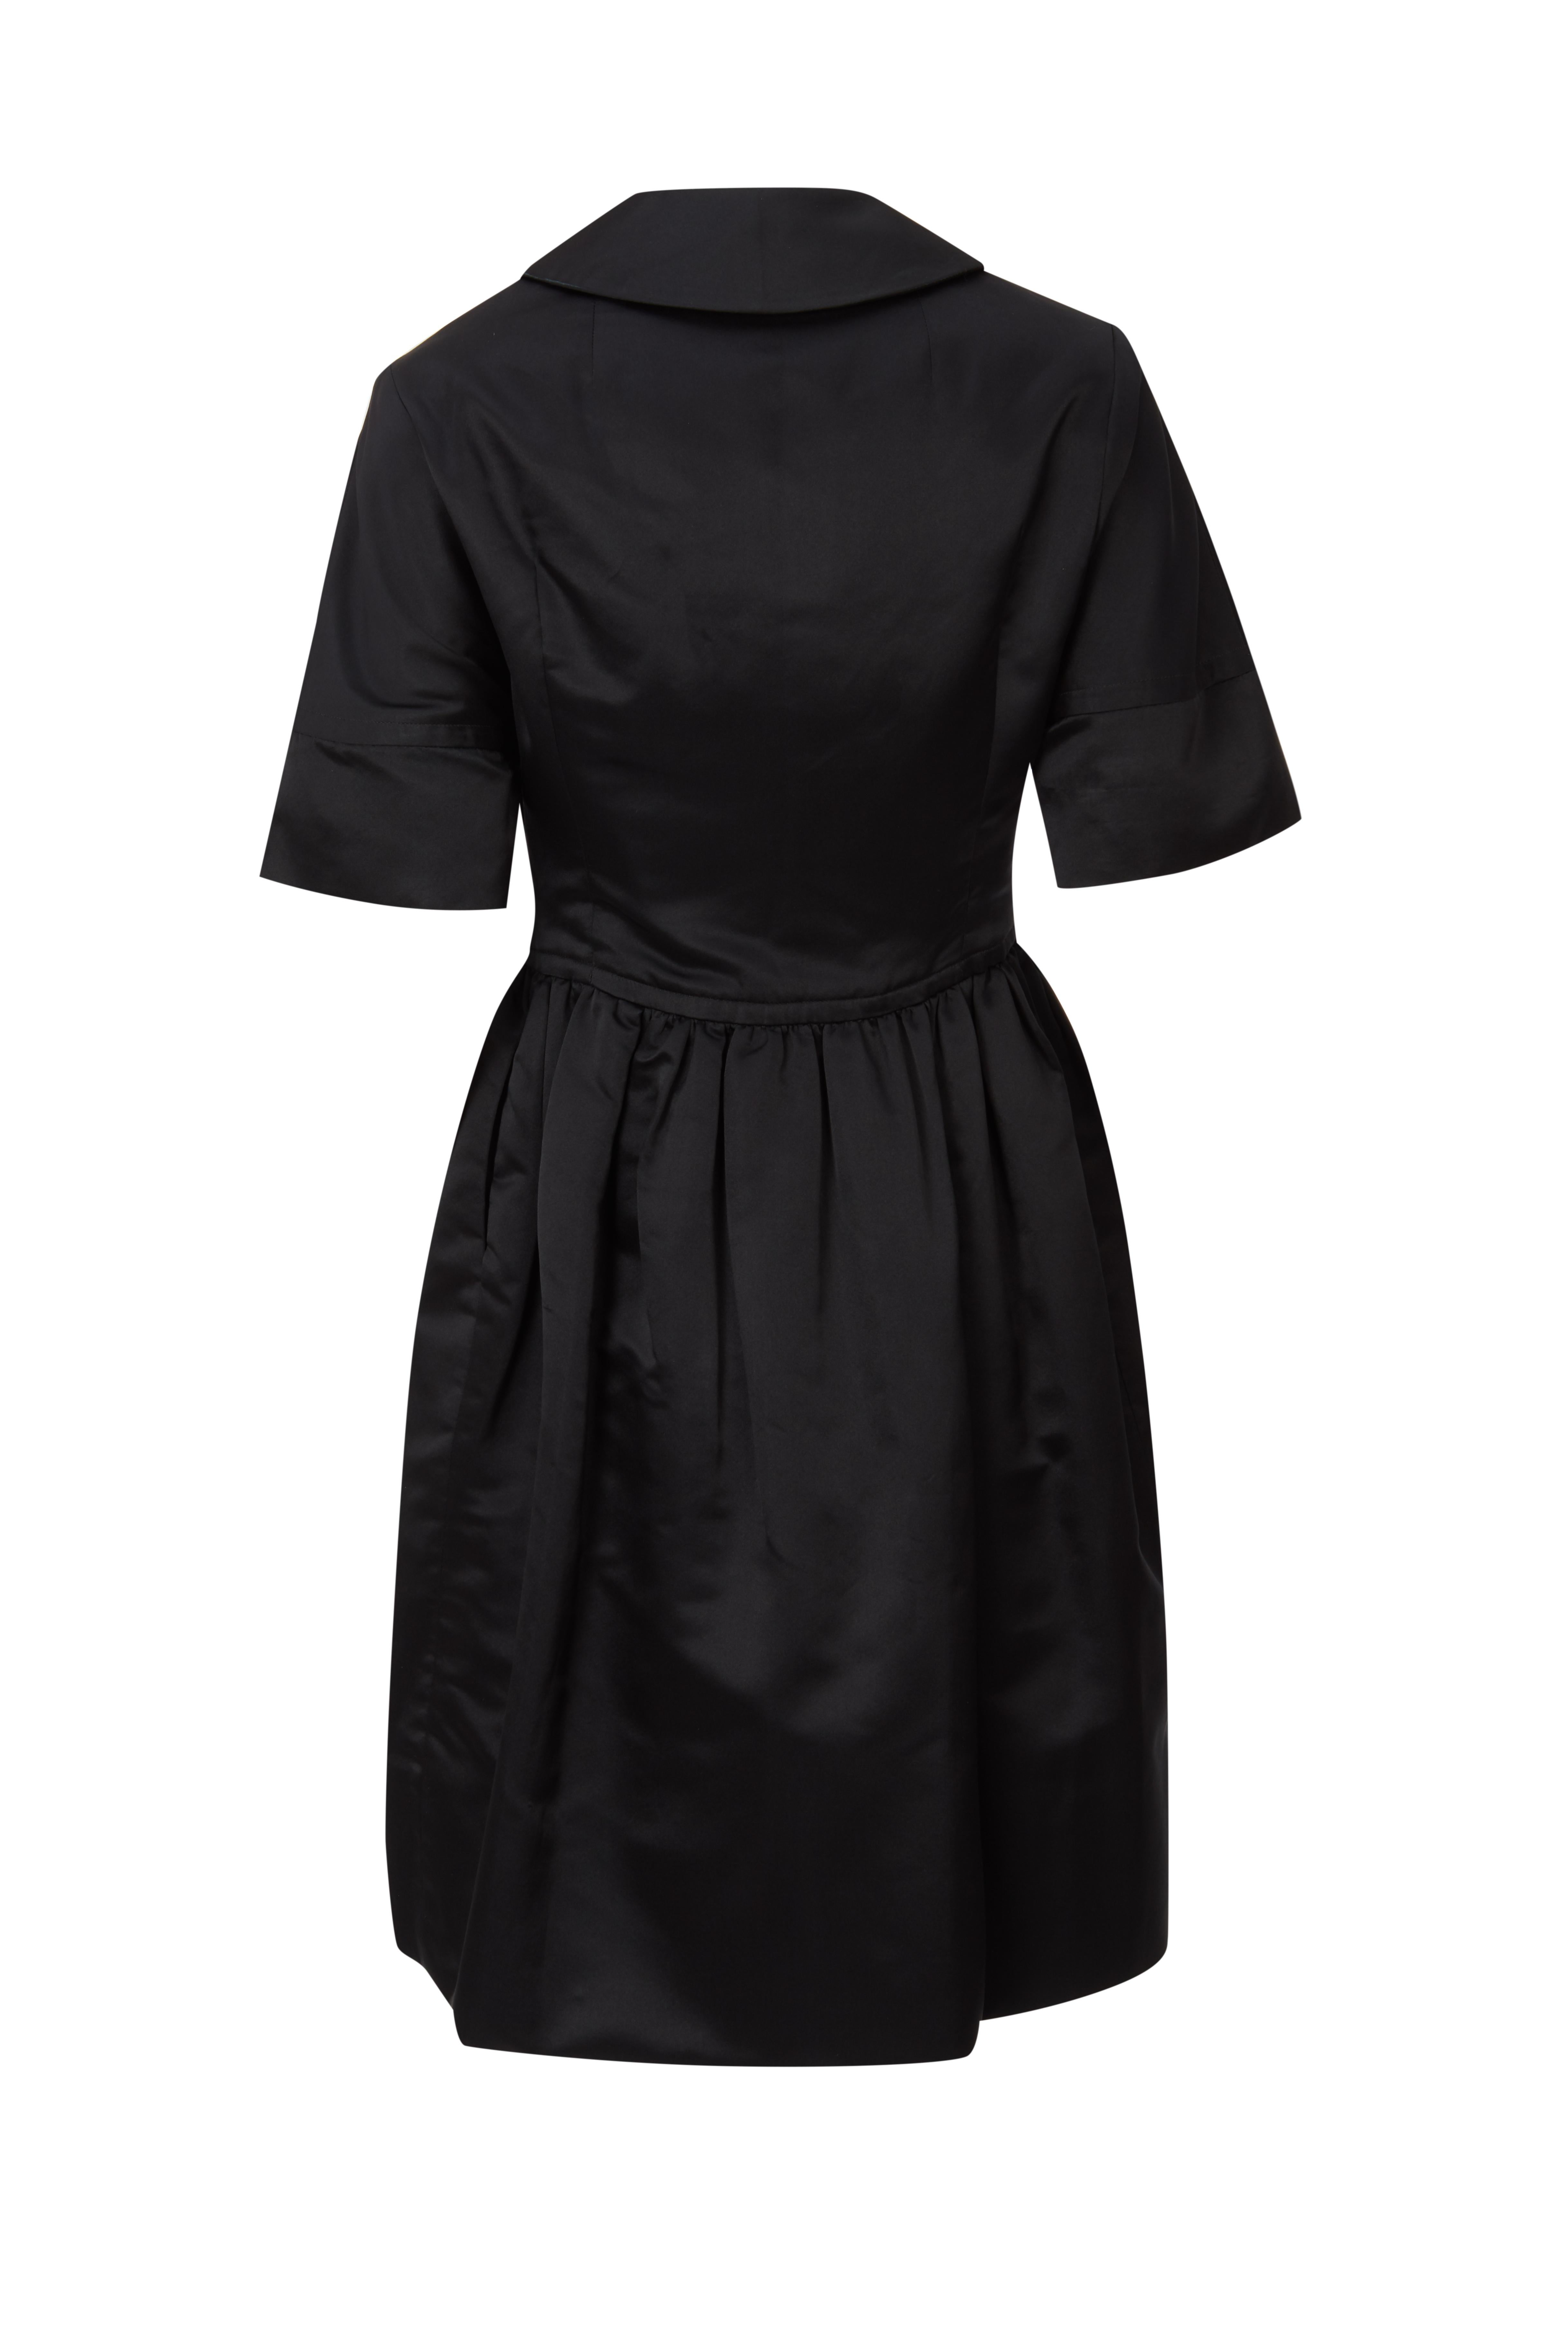 Elegant black unlabelled Christian Dior midi dress. Midi box pleated skirt makes it simple and sophisticated. The dress is strapless with a heart shape top and constructed in silk. 
